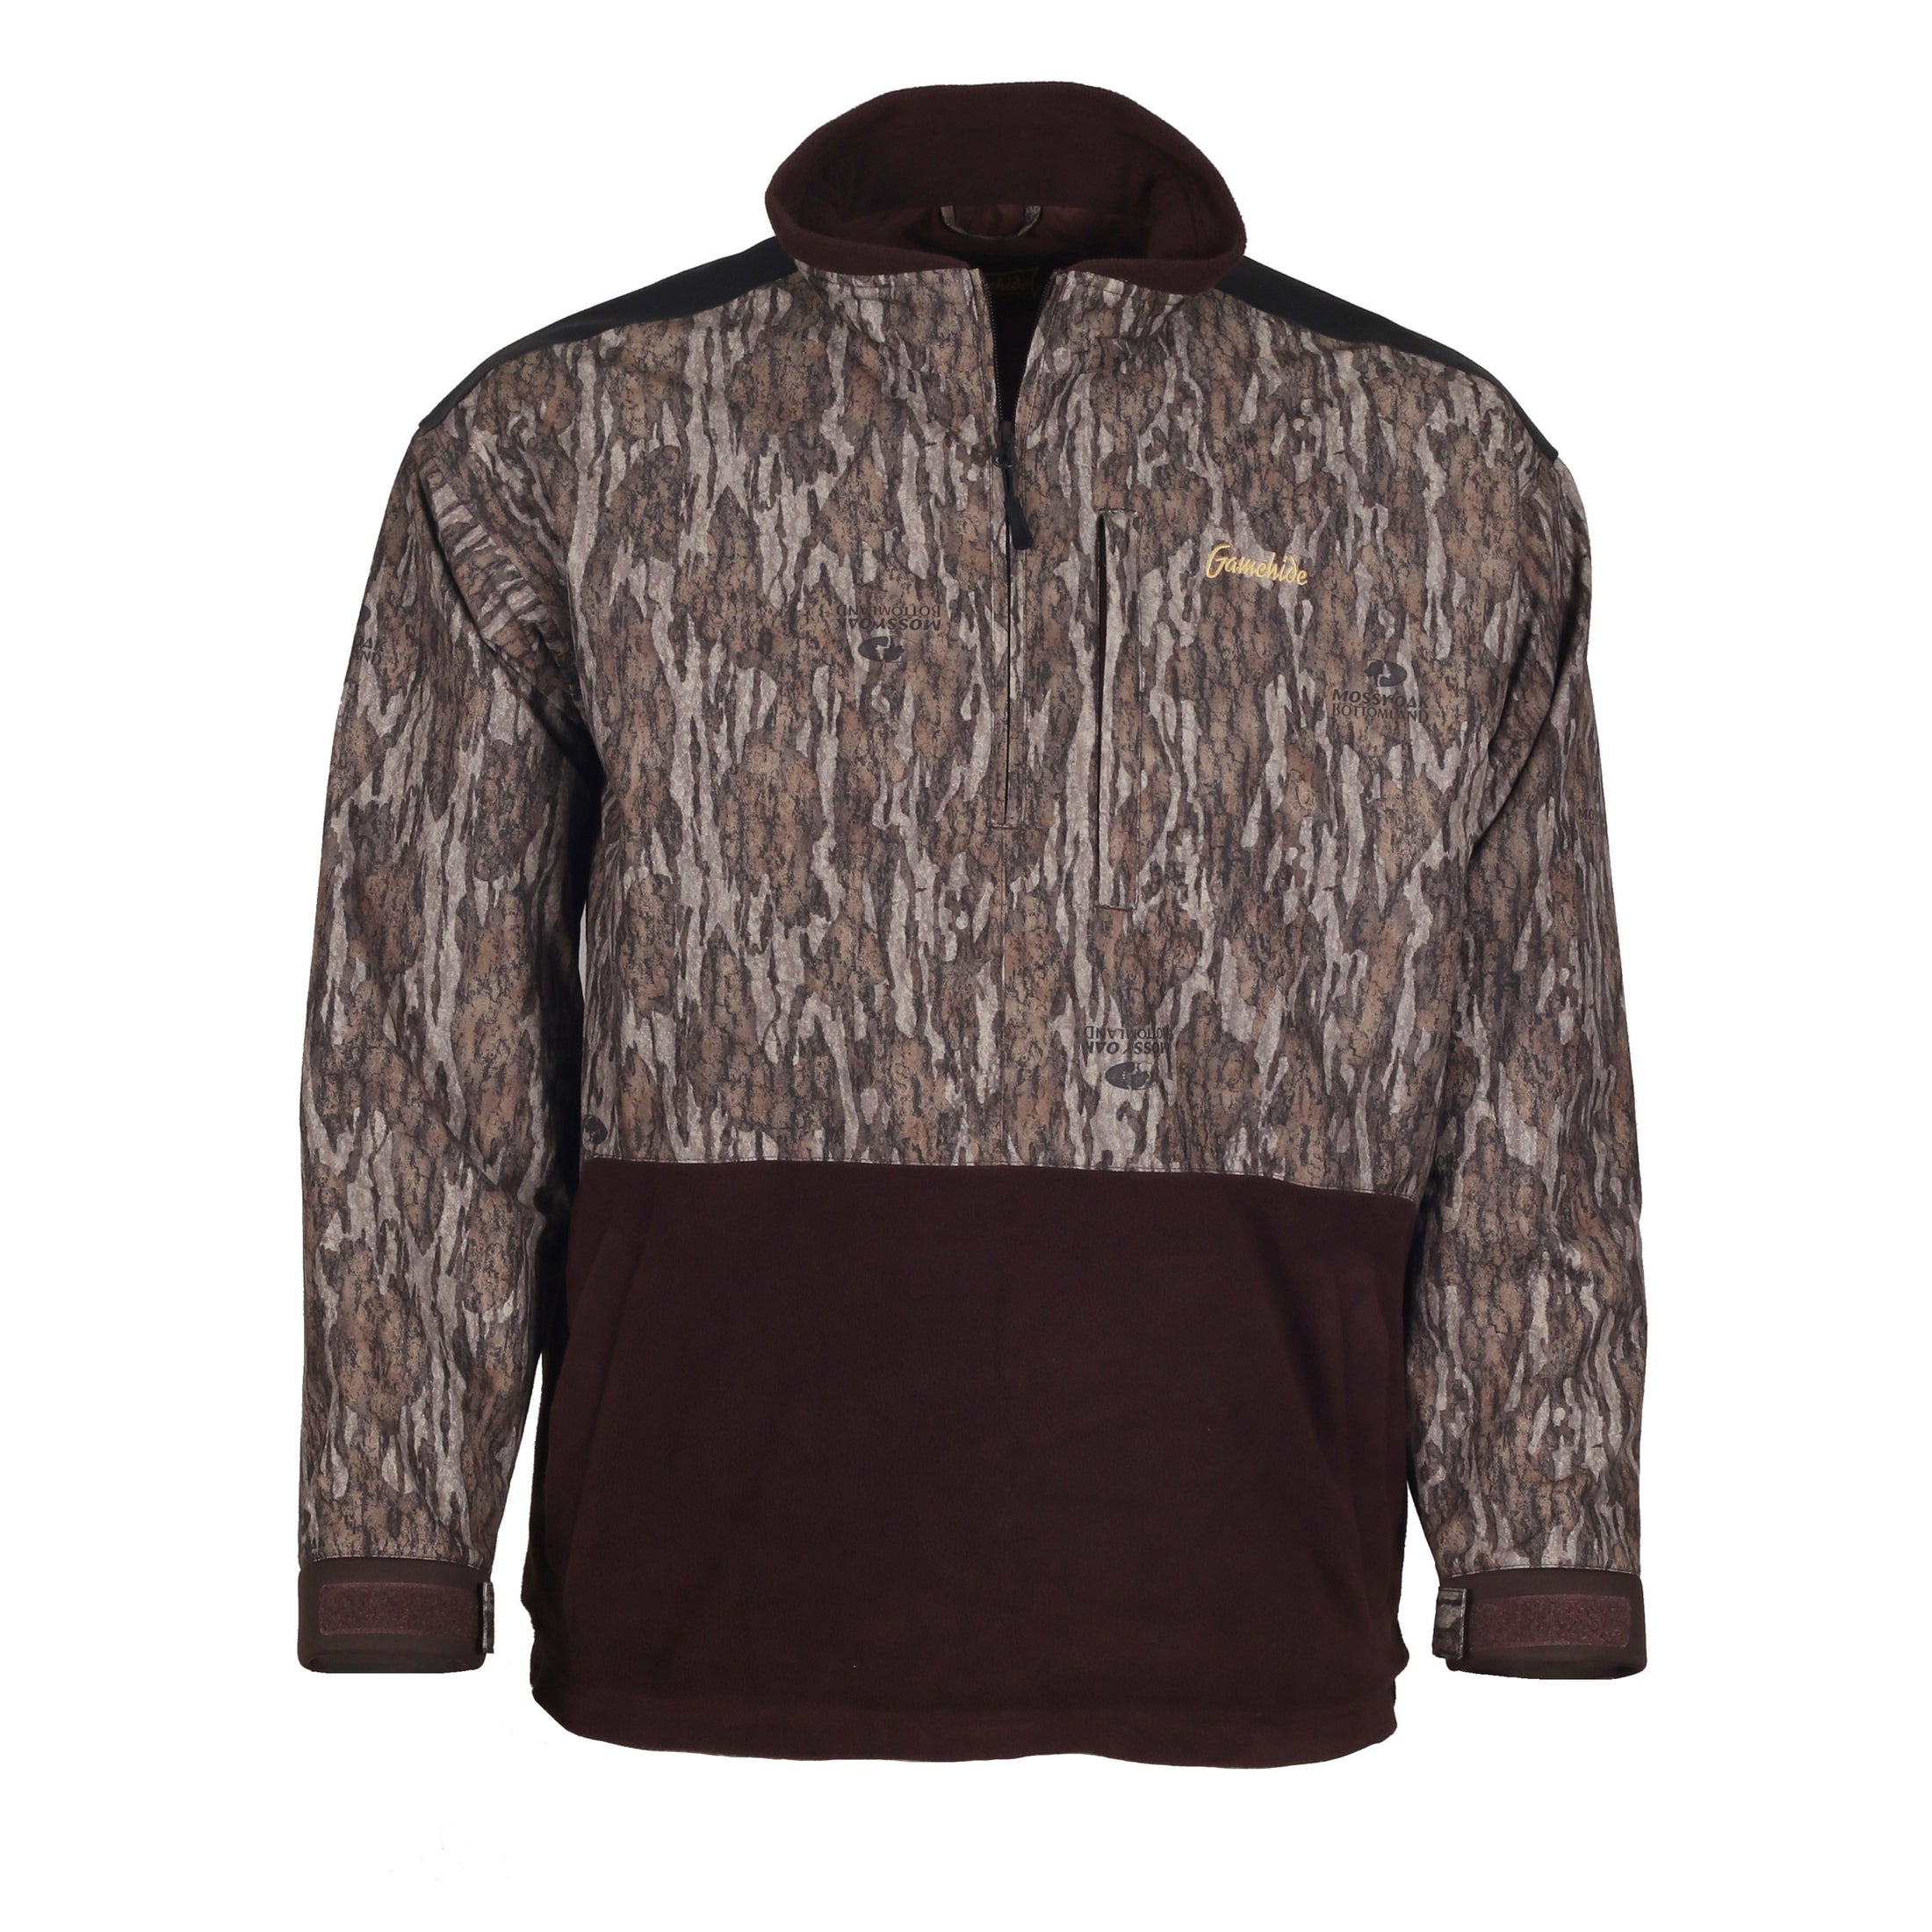 gamehide Marsh Lord Pullover front (mossy oak new bottomland)